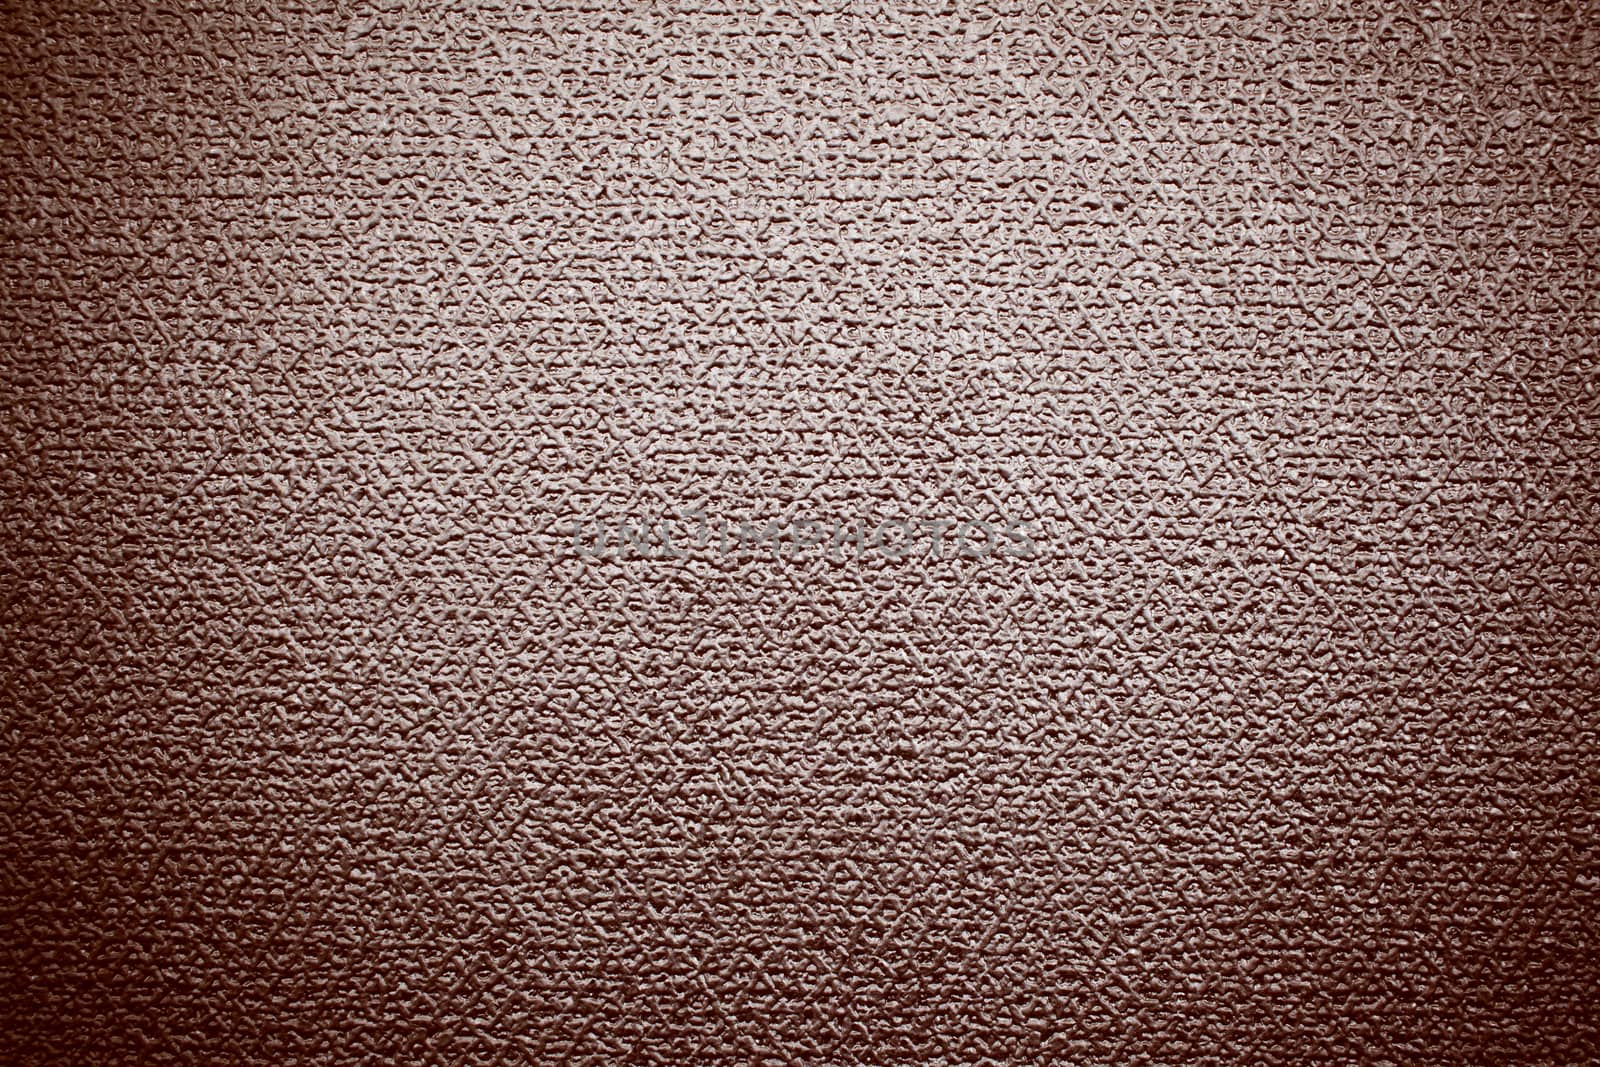 Leather texture background by FrameAngel